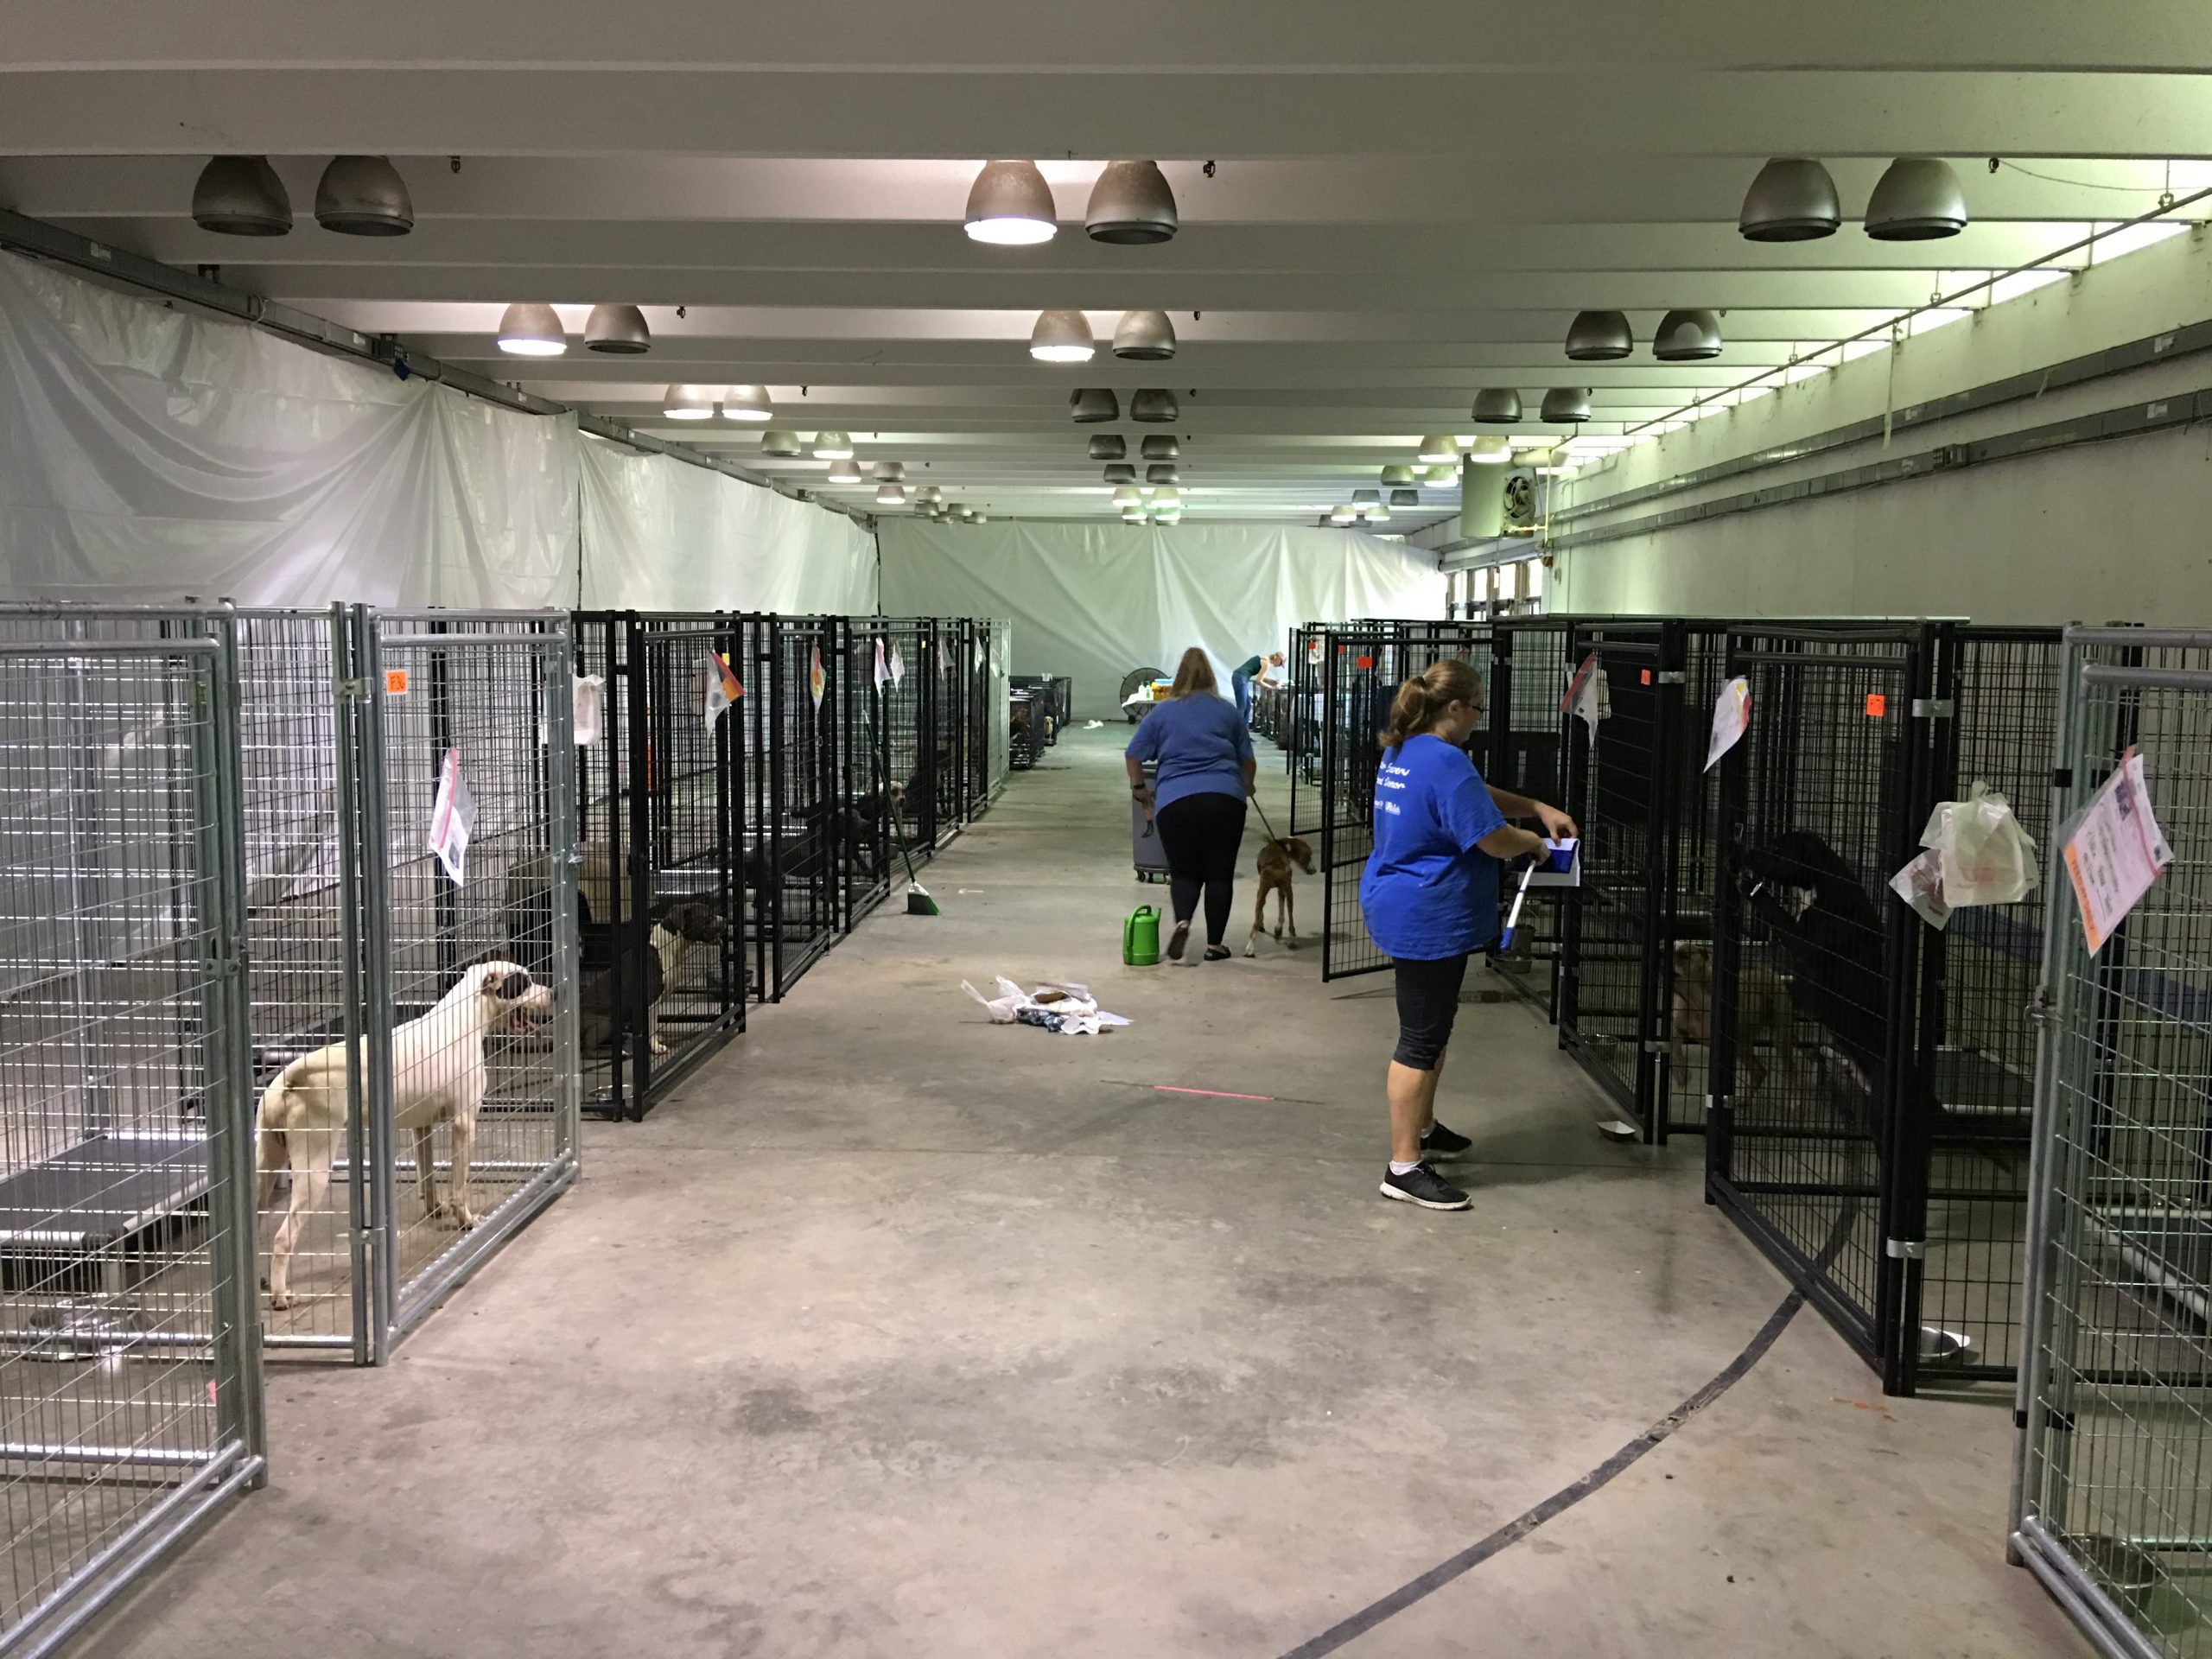 The Sac Rack: Death's Waiting Room for Animals in Labs